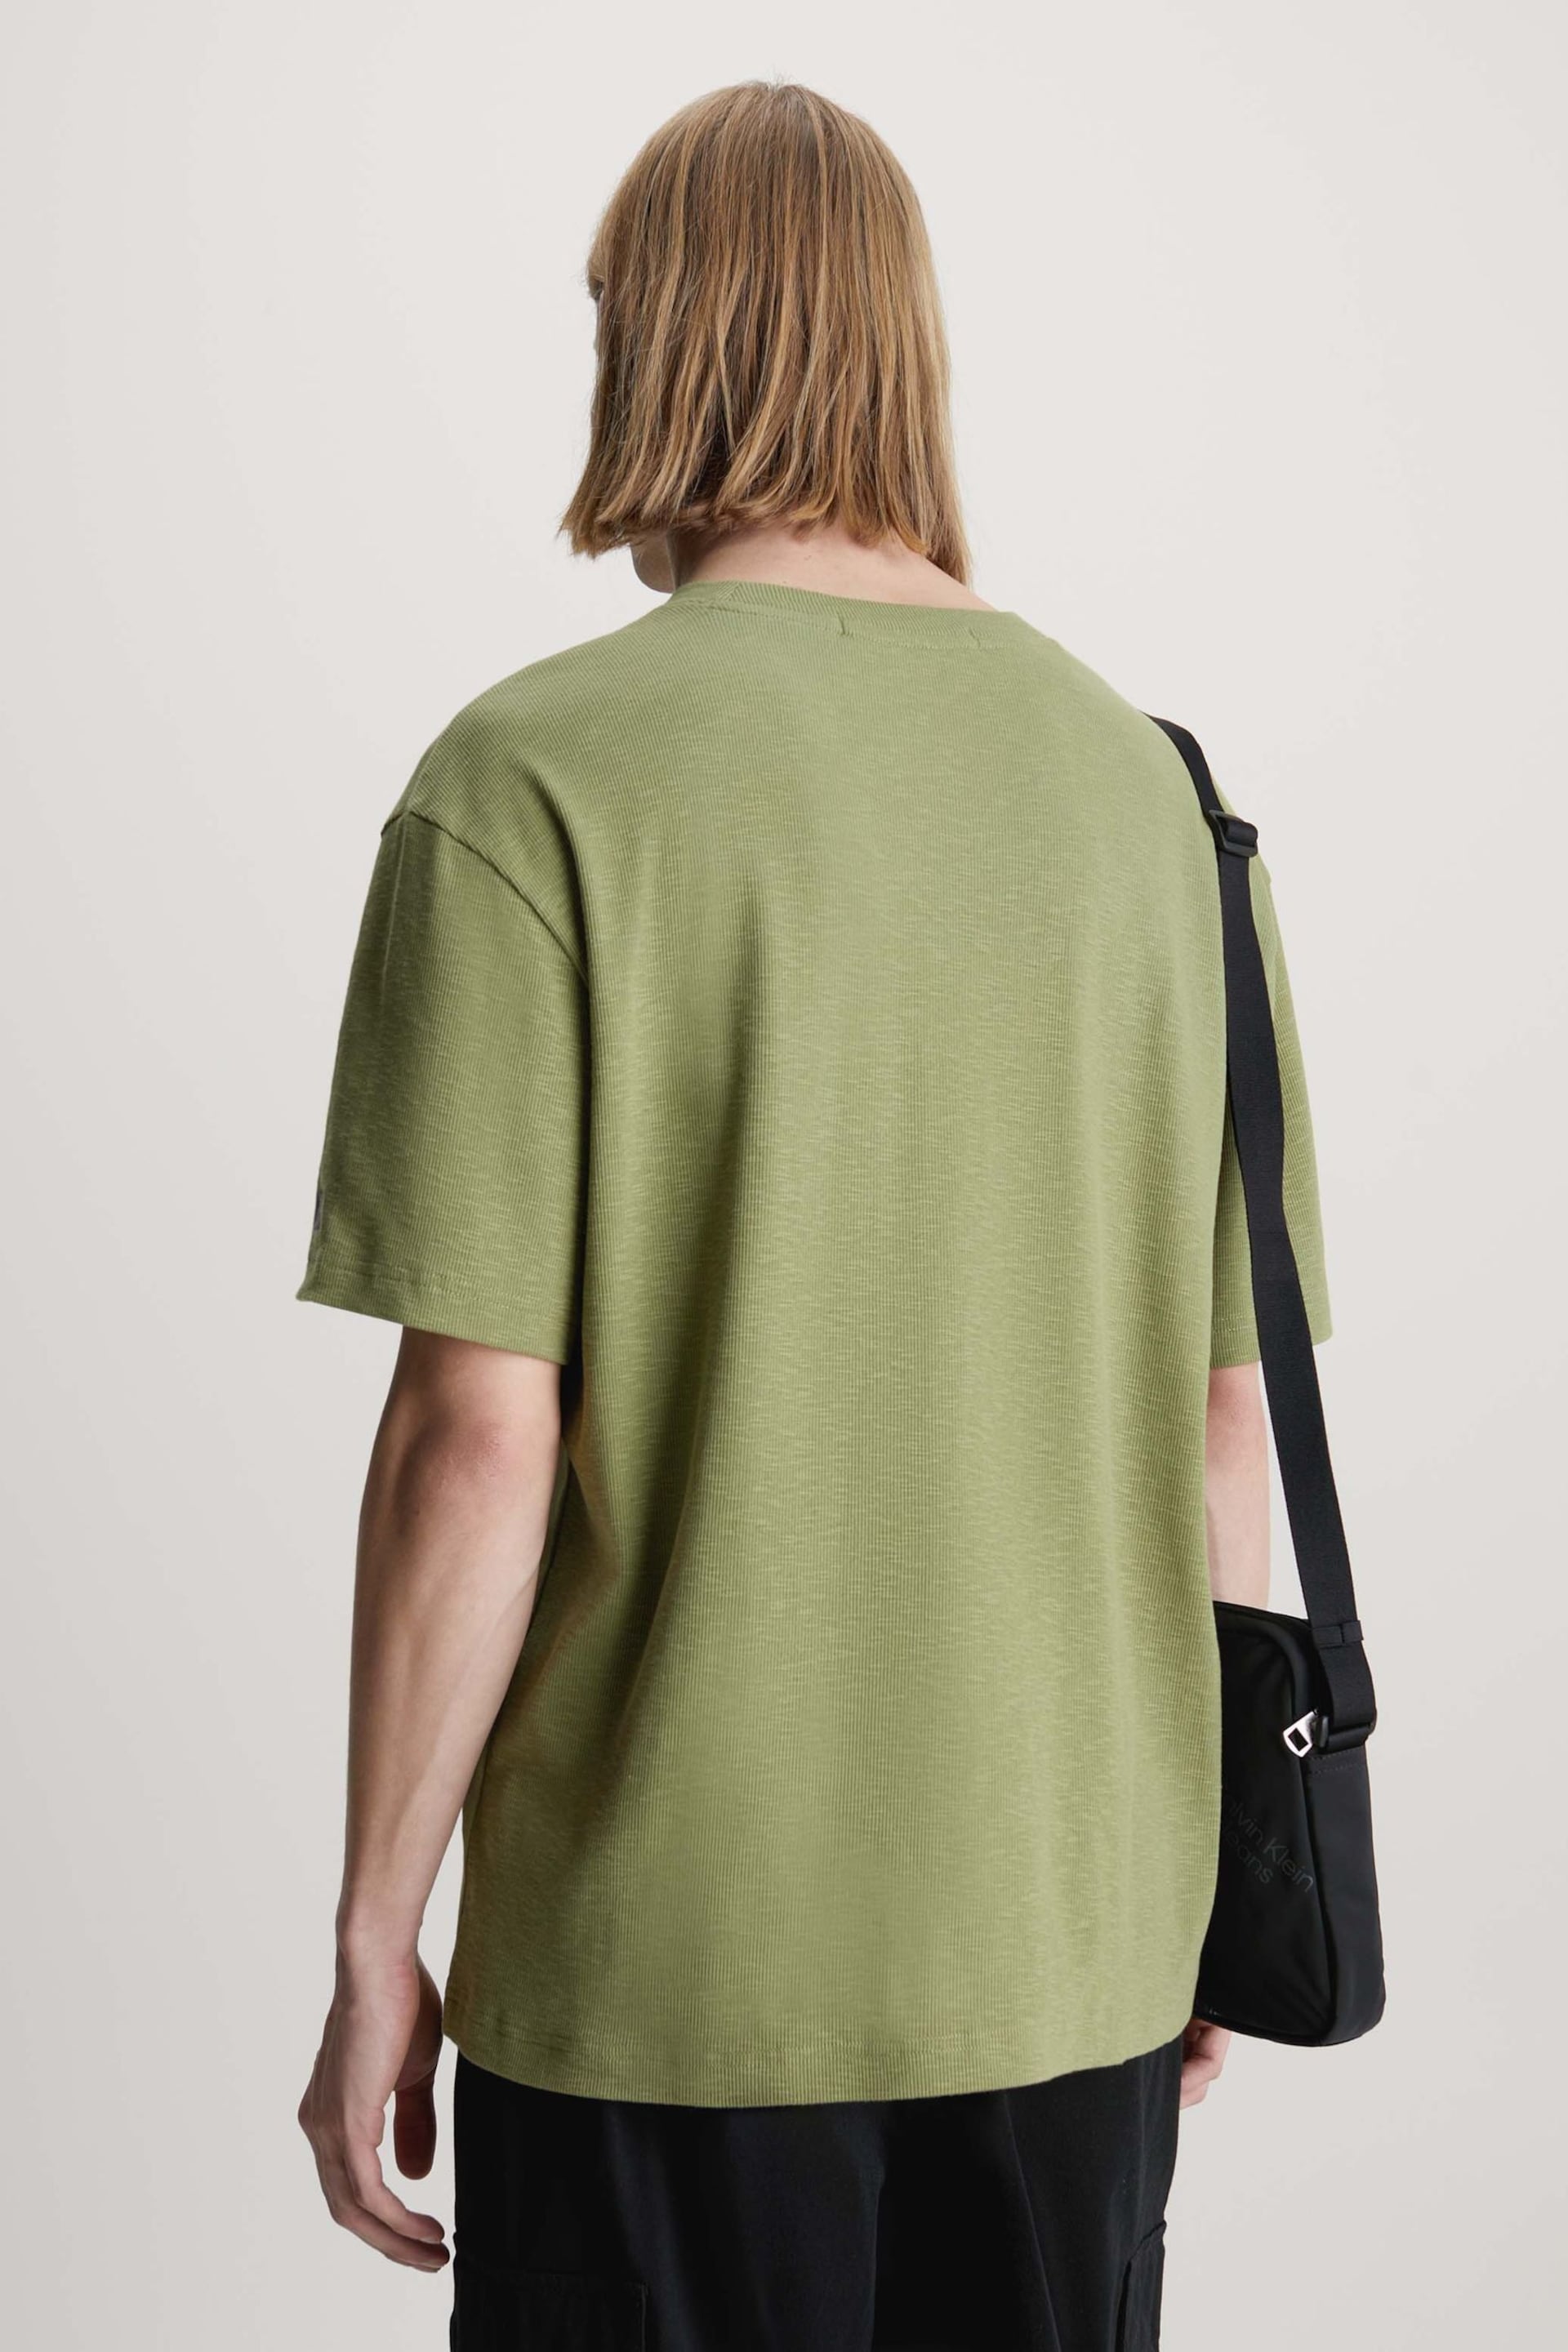 Calvin Klein Green Cut And Sew Logo T-Shirt - Image 2 of 3